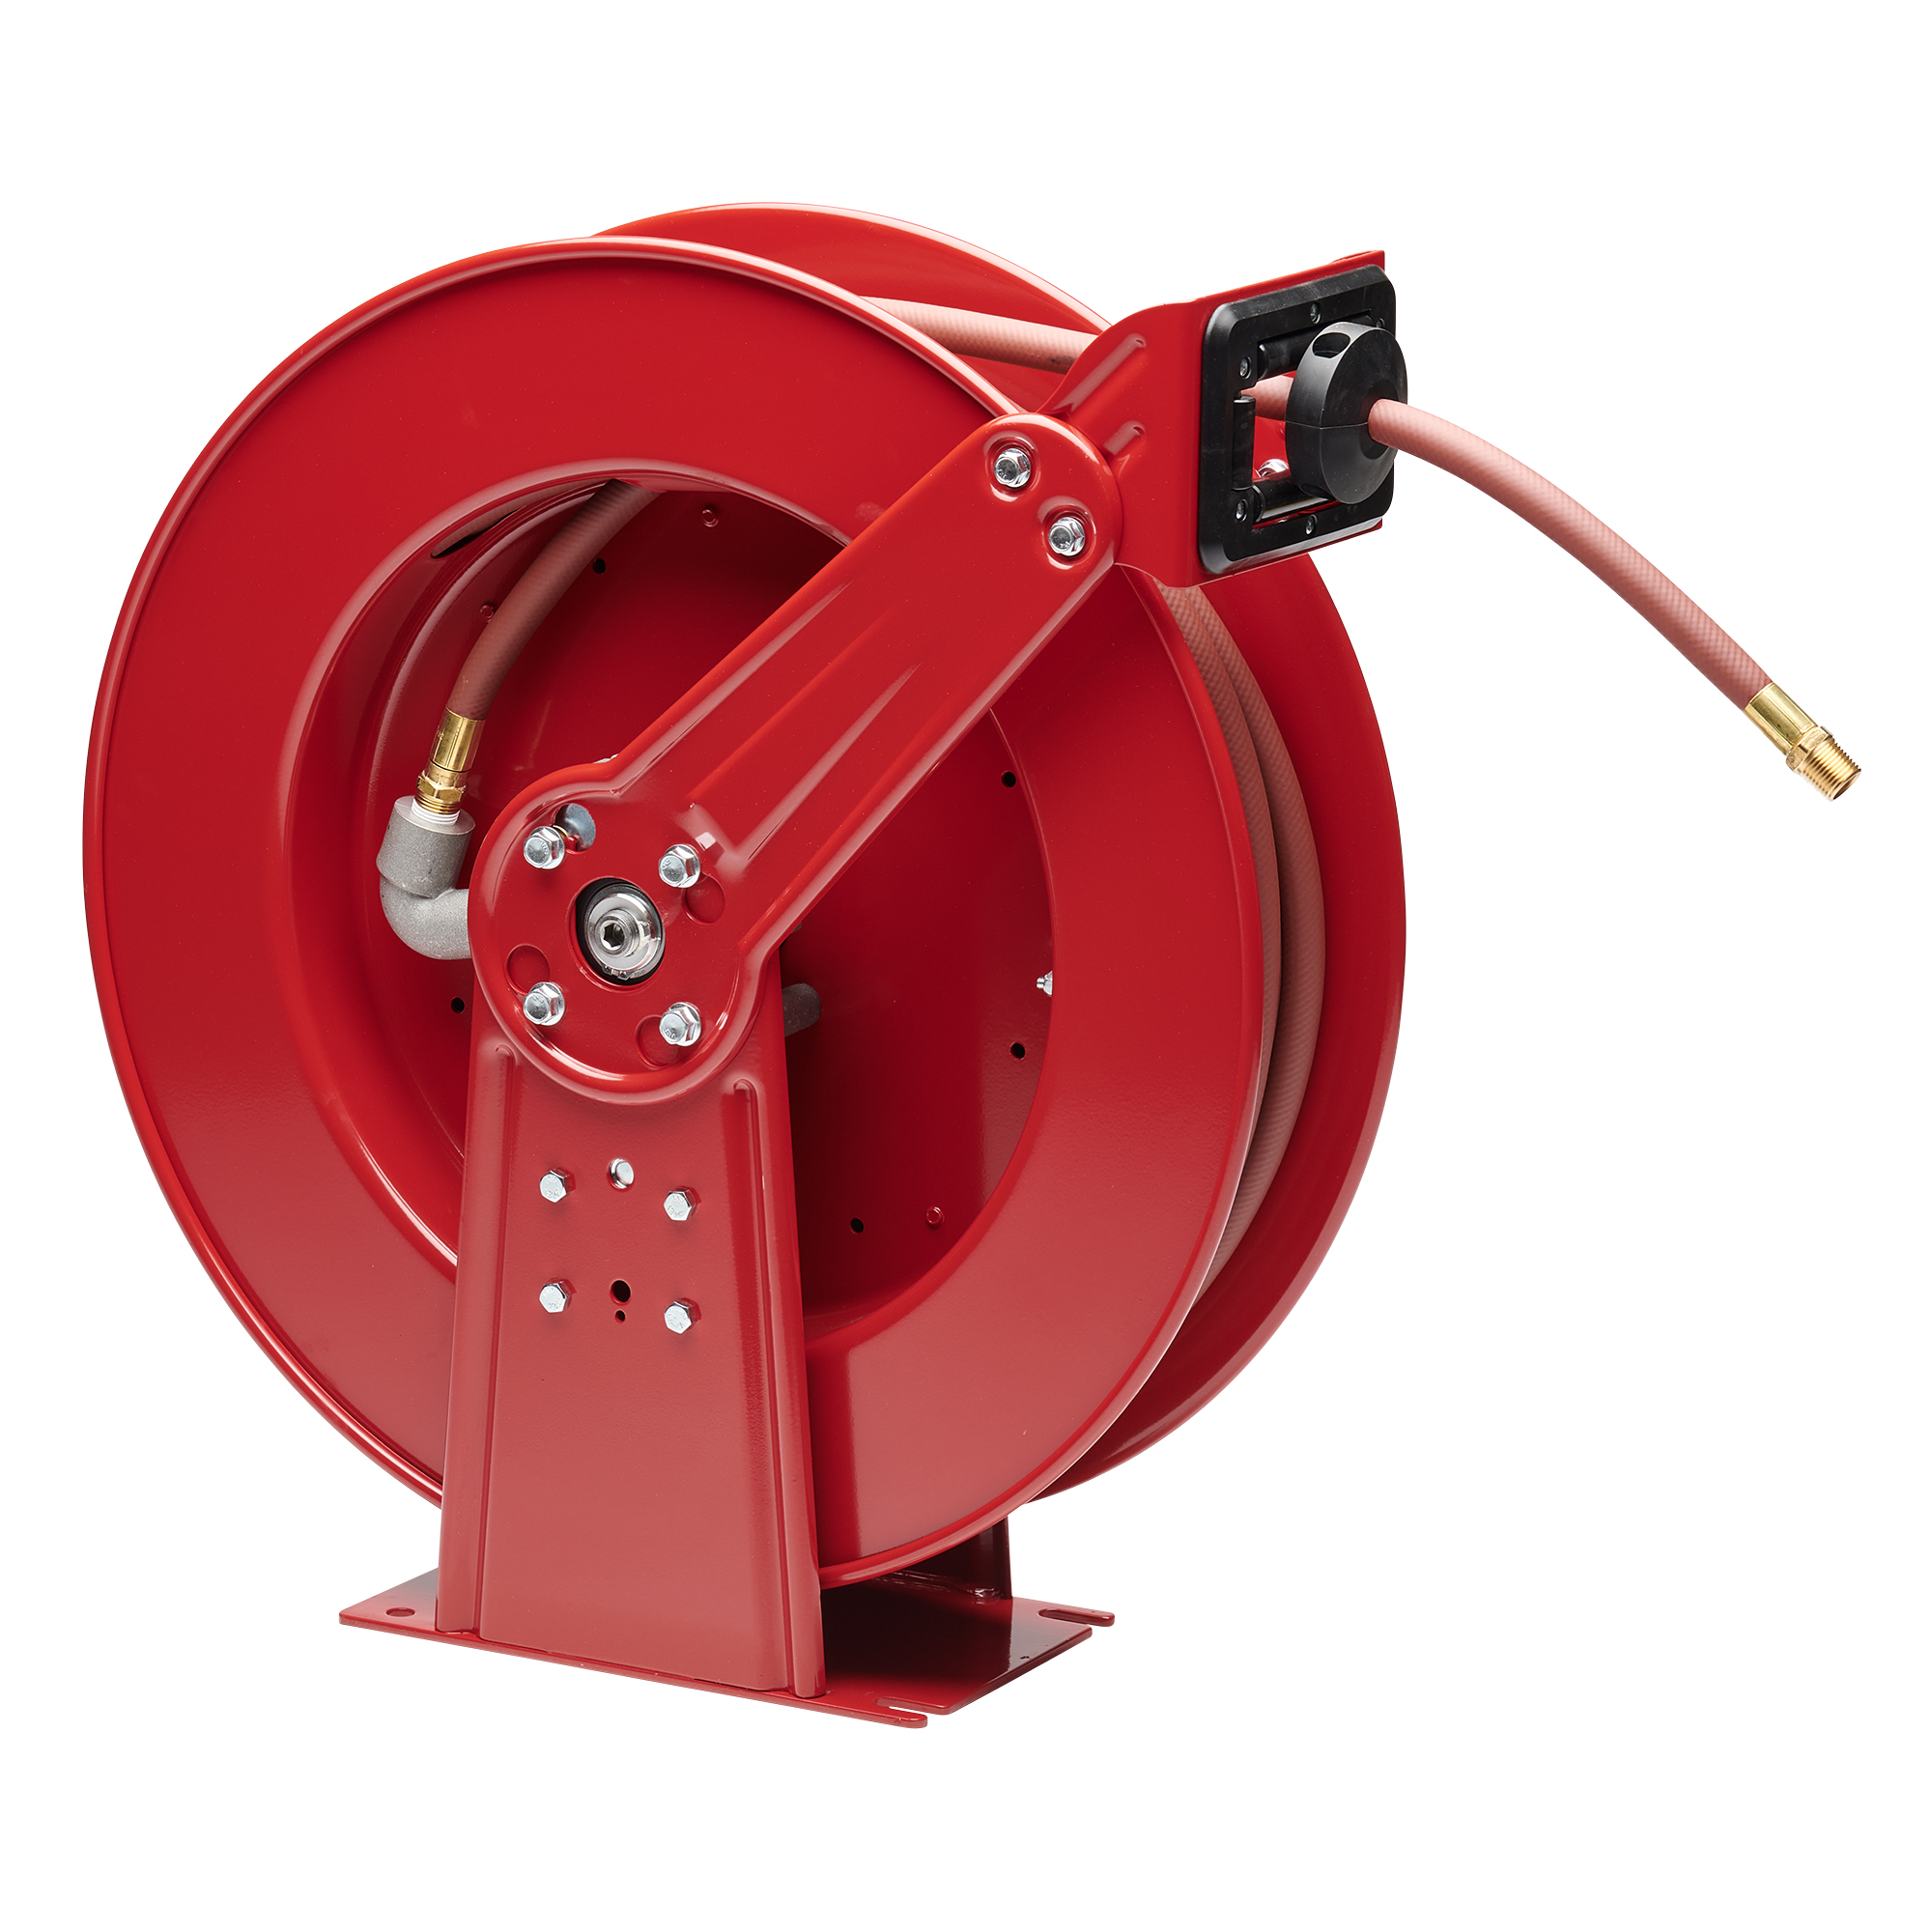 Black Bull Retractable Air Hose Reel with Auto Rewind, 100 Ft